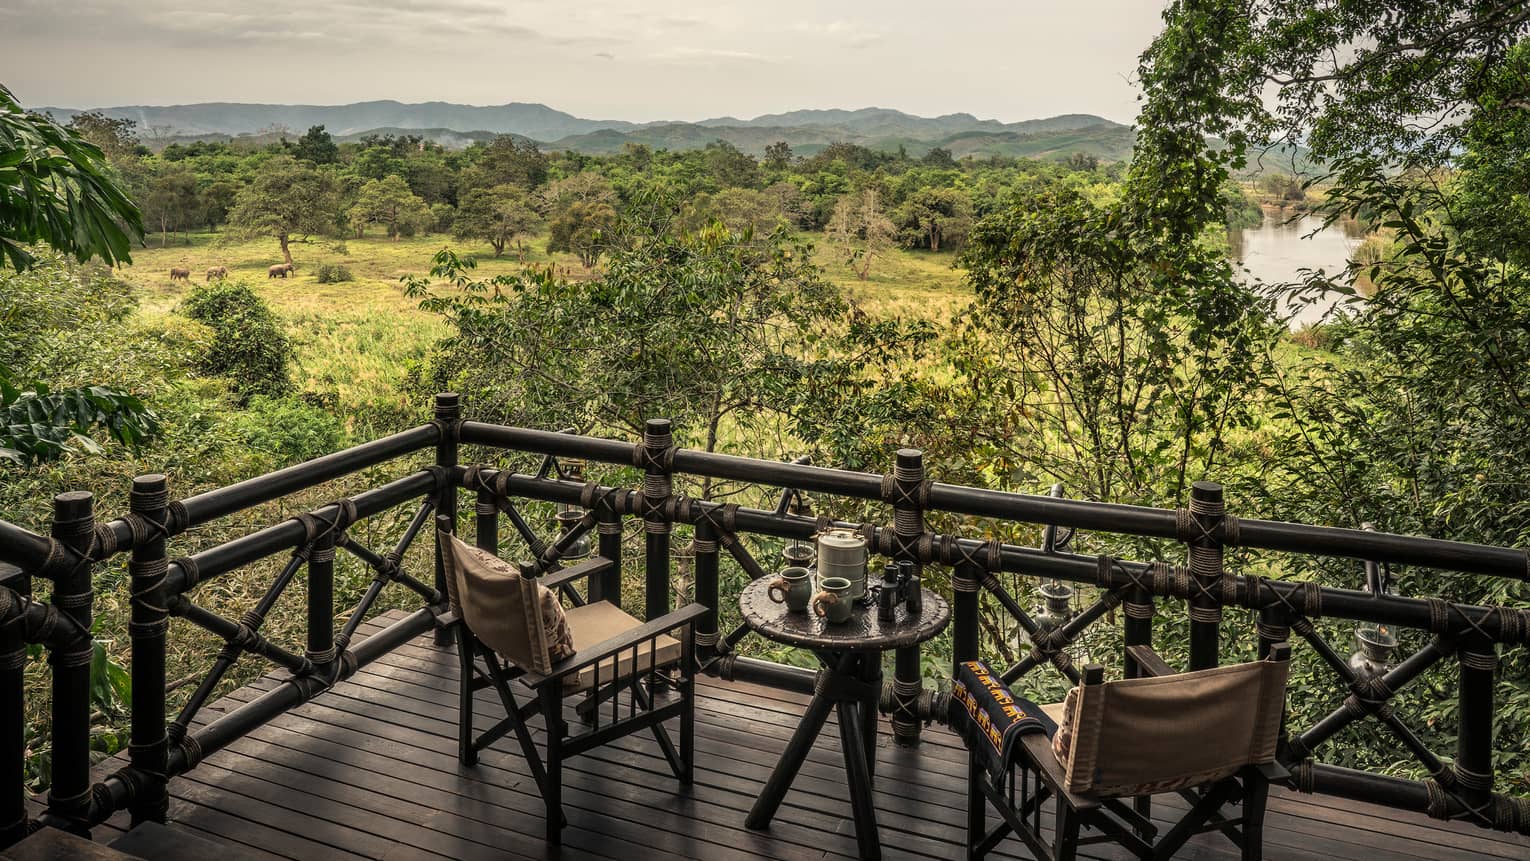 Wood chairs on balcony, looking out at green field with roaming elephants